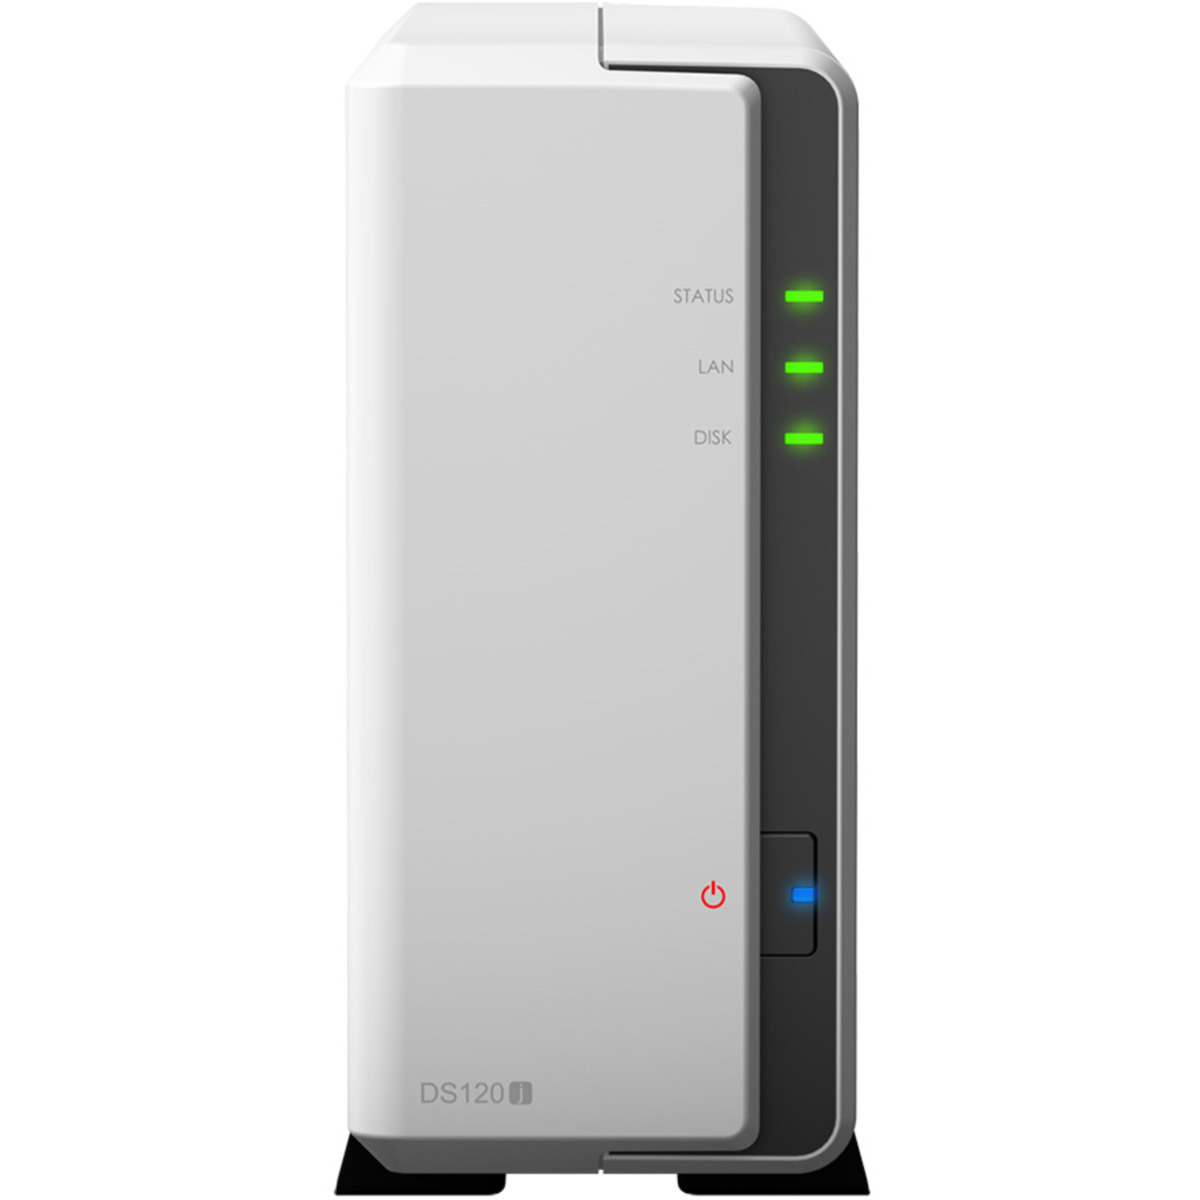 buy $440 Synology DiskStation DS120j 2tb Desktop NAS - Network Attached Storage Device 1x2000gb Western Digital Red SA500 WDS200T1R0A 2.5 SATA 6Gb/s SSD NAS Class Drives Installed - Burn-In Tested - nas headquarters buy network attached storage server device das new raid-5 free shipping usa DiskStation DS120j